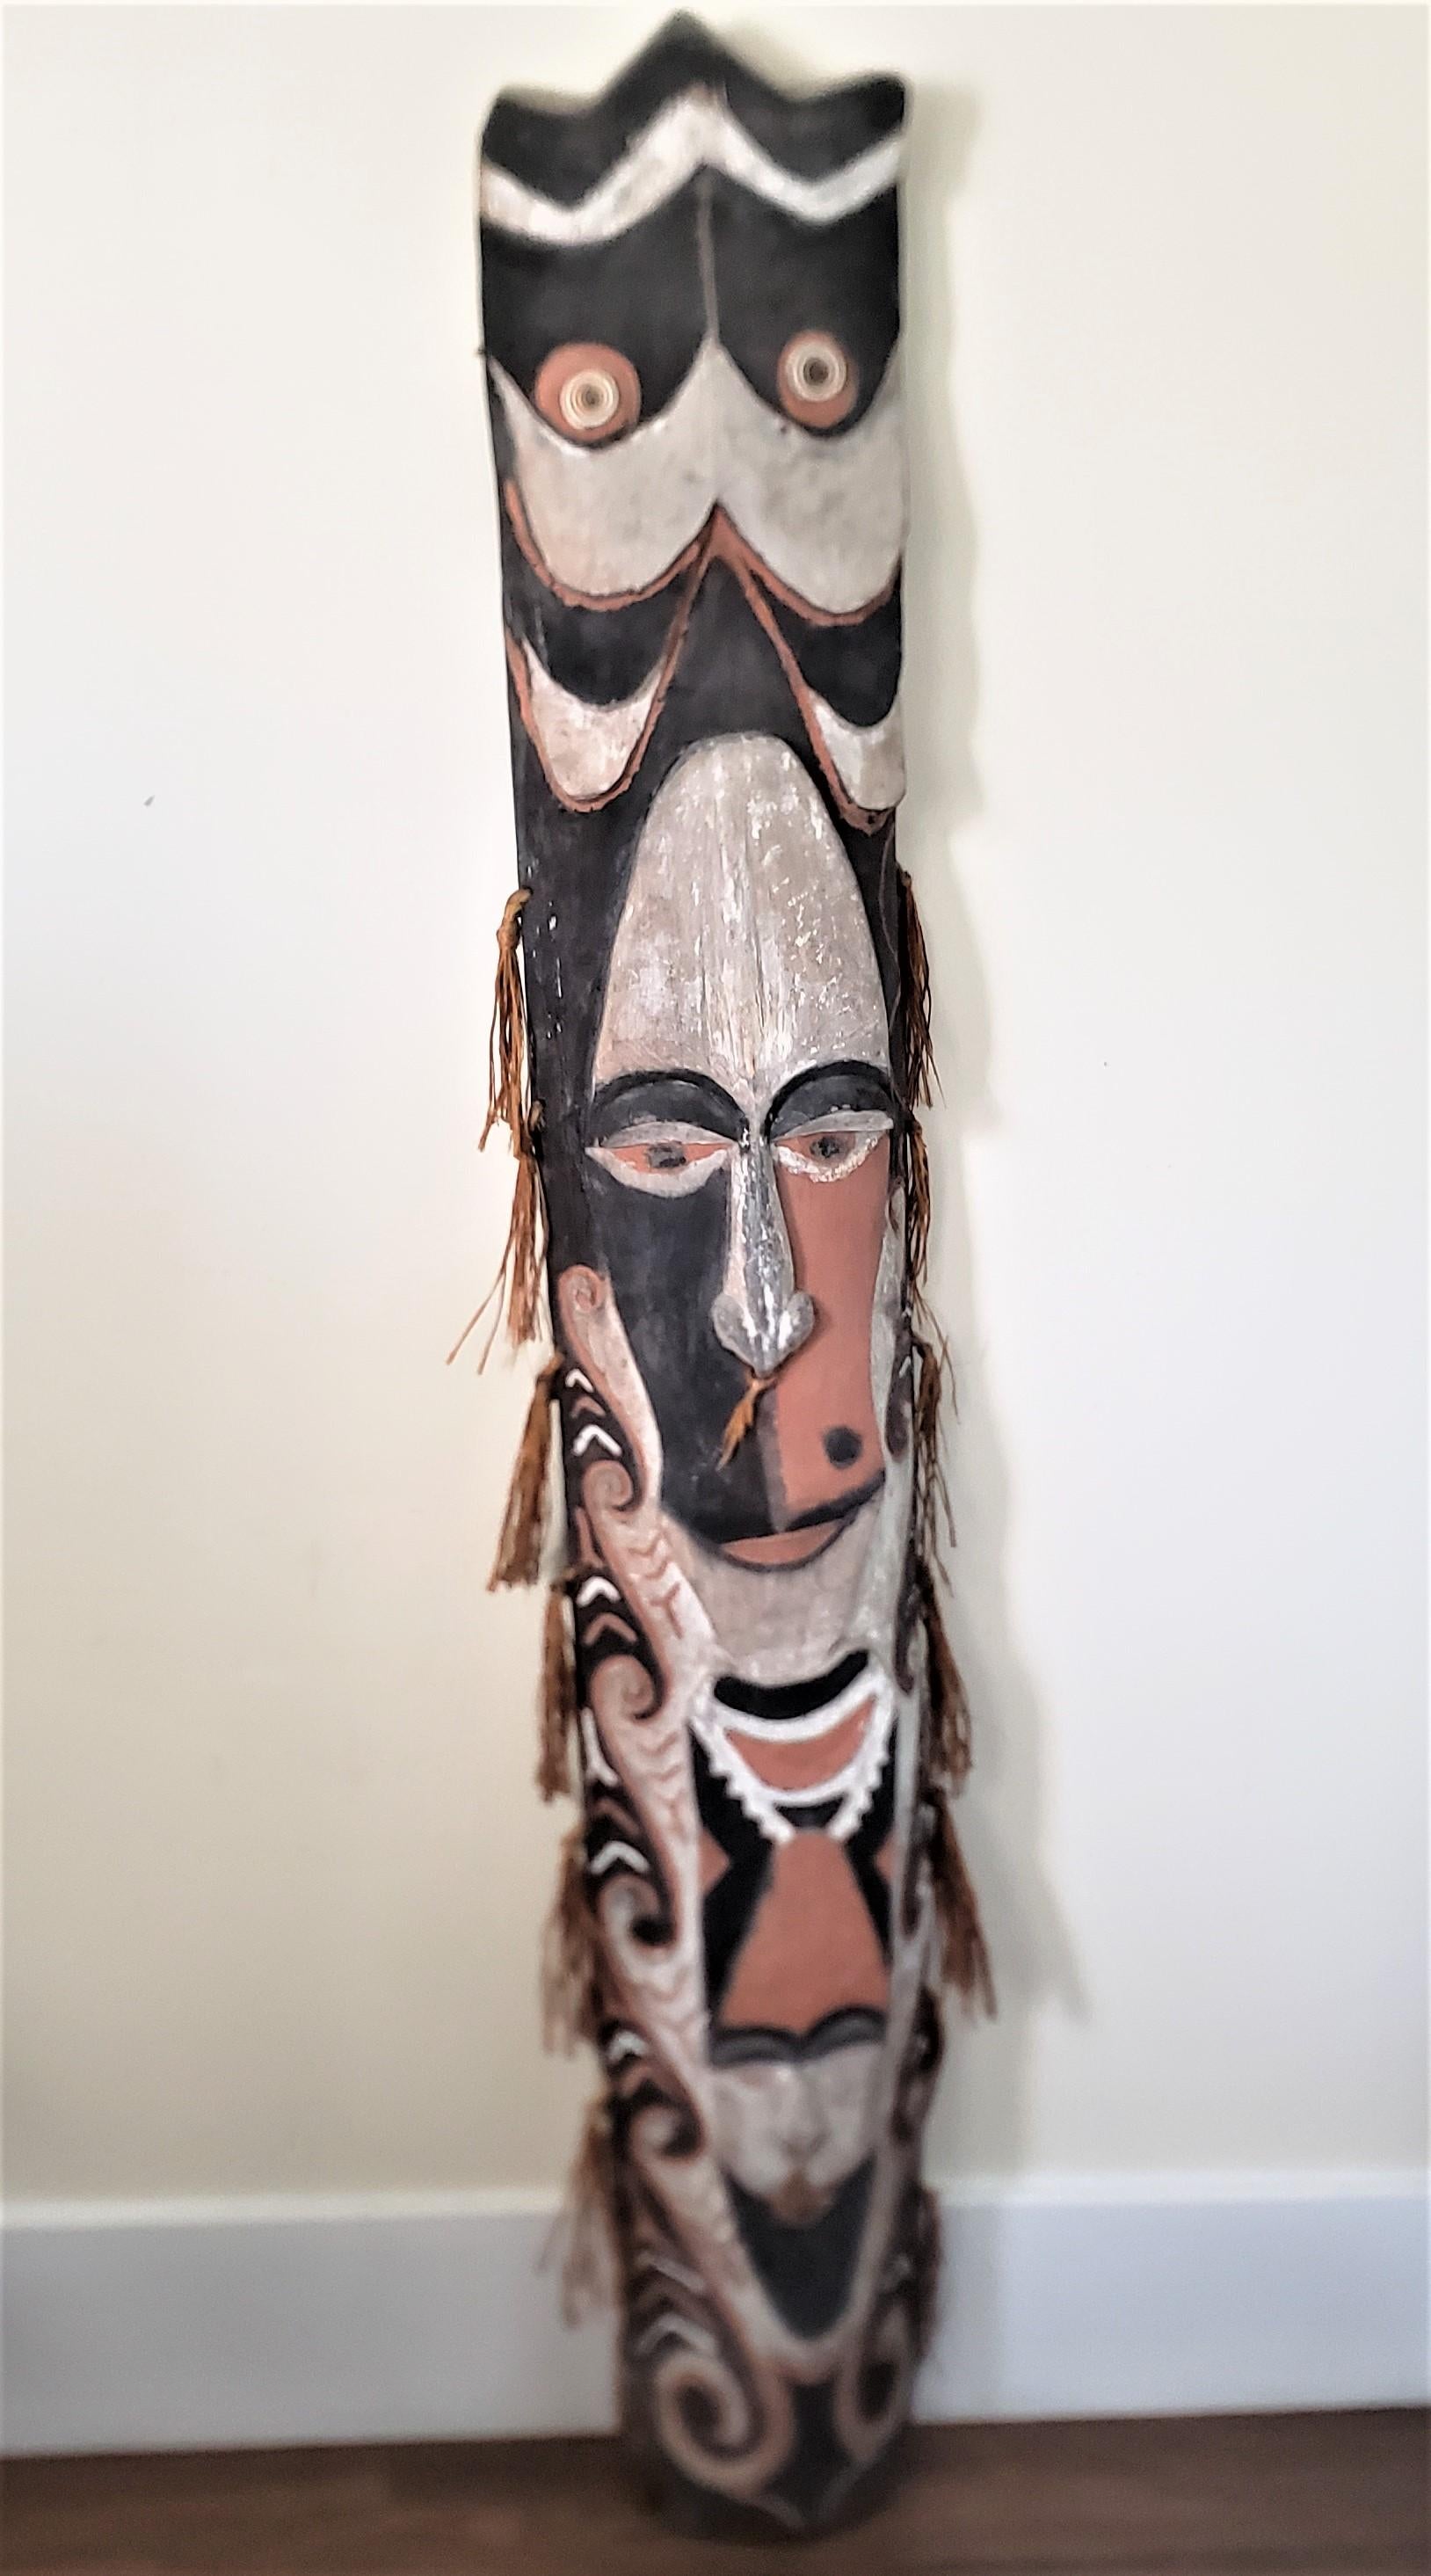 This large antique tribal mask or sculpture is unsigned and undocumented, but presumed to have originated from Southeast Asia and done in a folk art style. The sculpture os composed of a fragment from a softwood tree and has been hand-carved with a